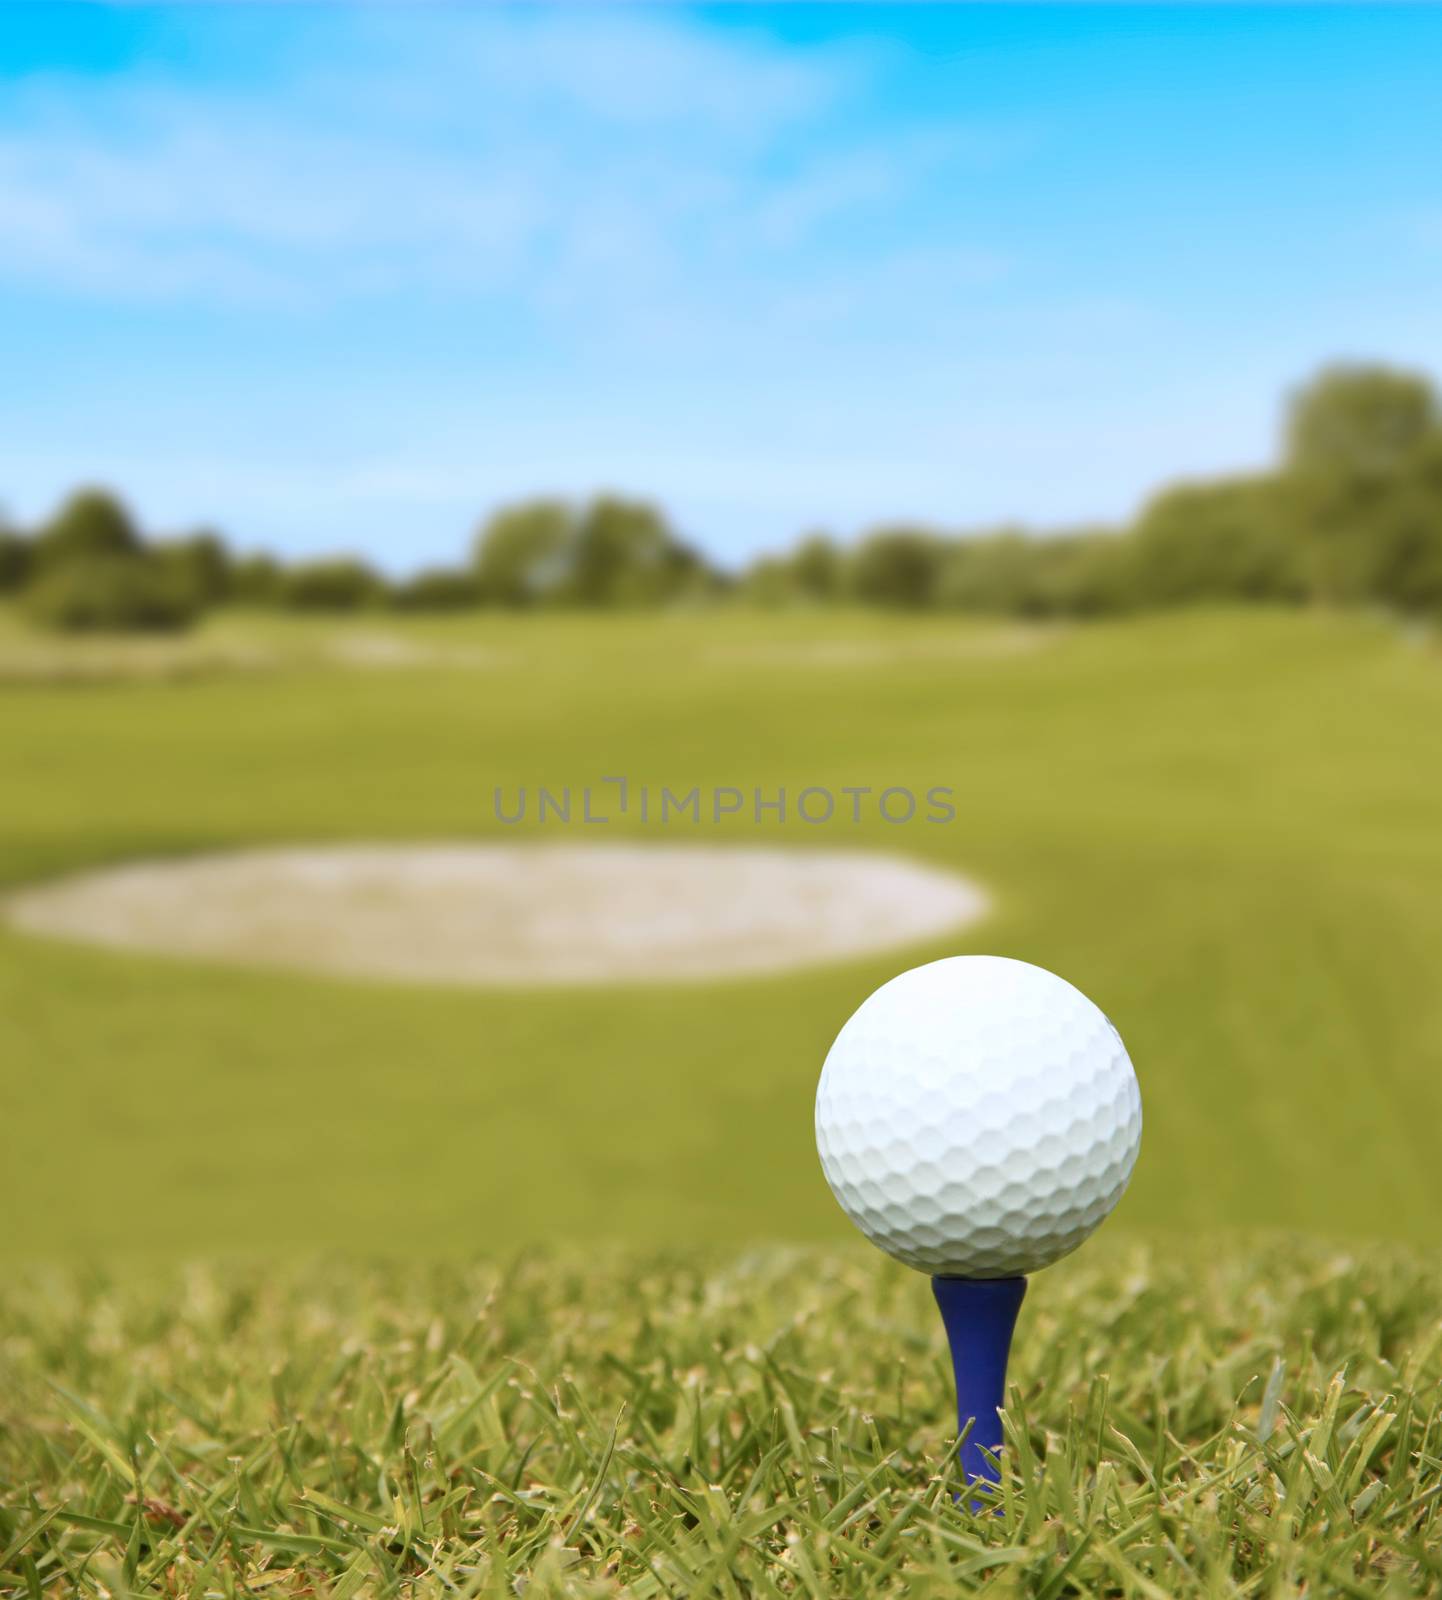 Golf ball on course with beautiful blurry landscape on background